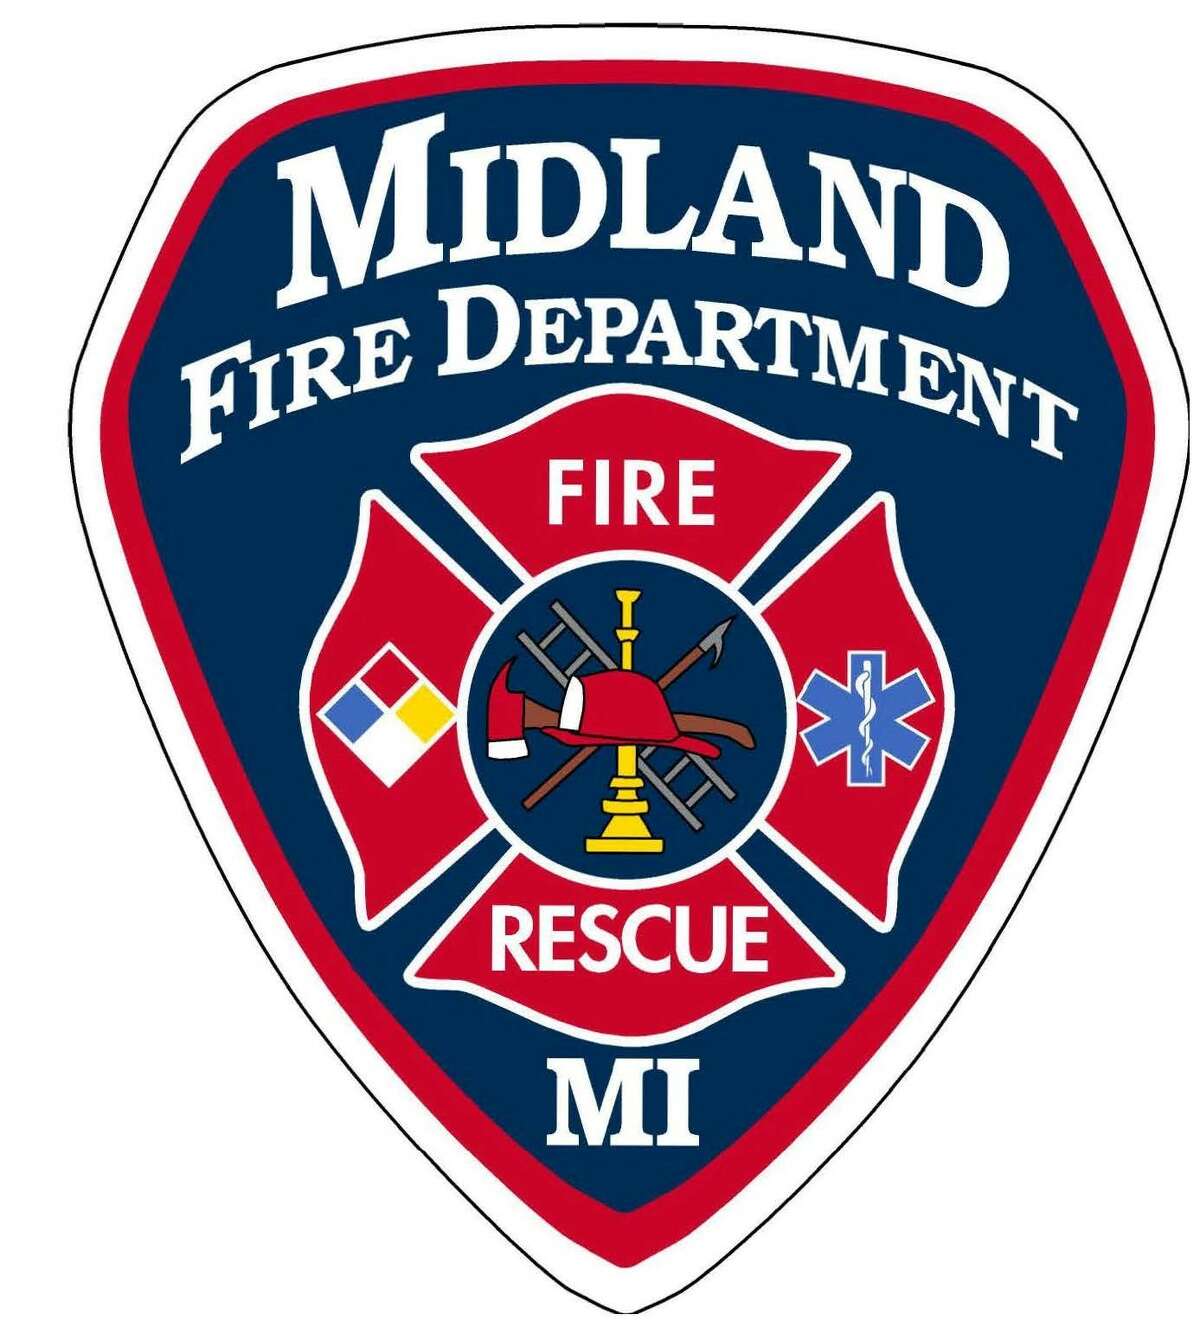 Midland Fire Department joined forces with the Midland Police Department on Dec. 29 to rescue a person who had fallen through the ice on the Tittabawassee River near the Tridge in Midland.